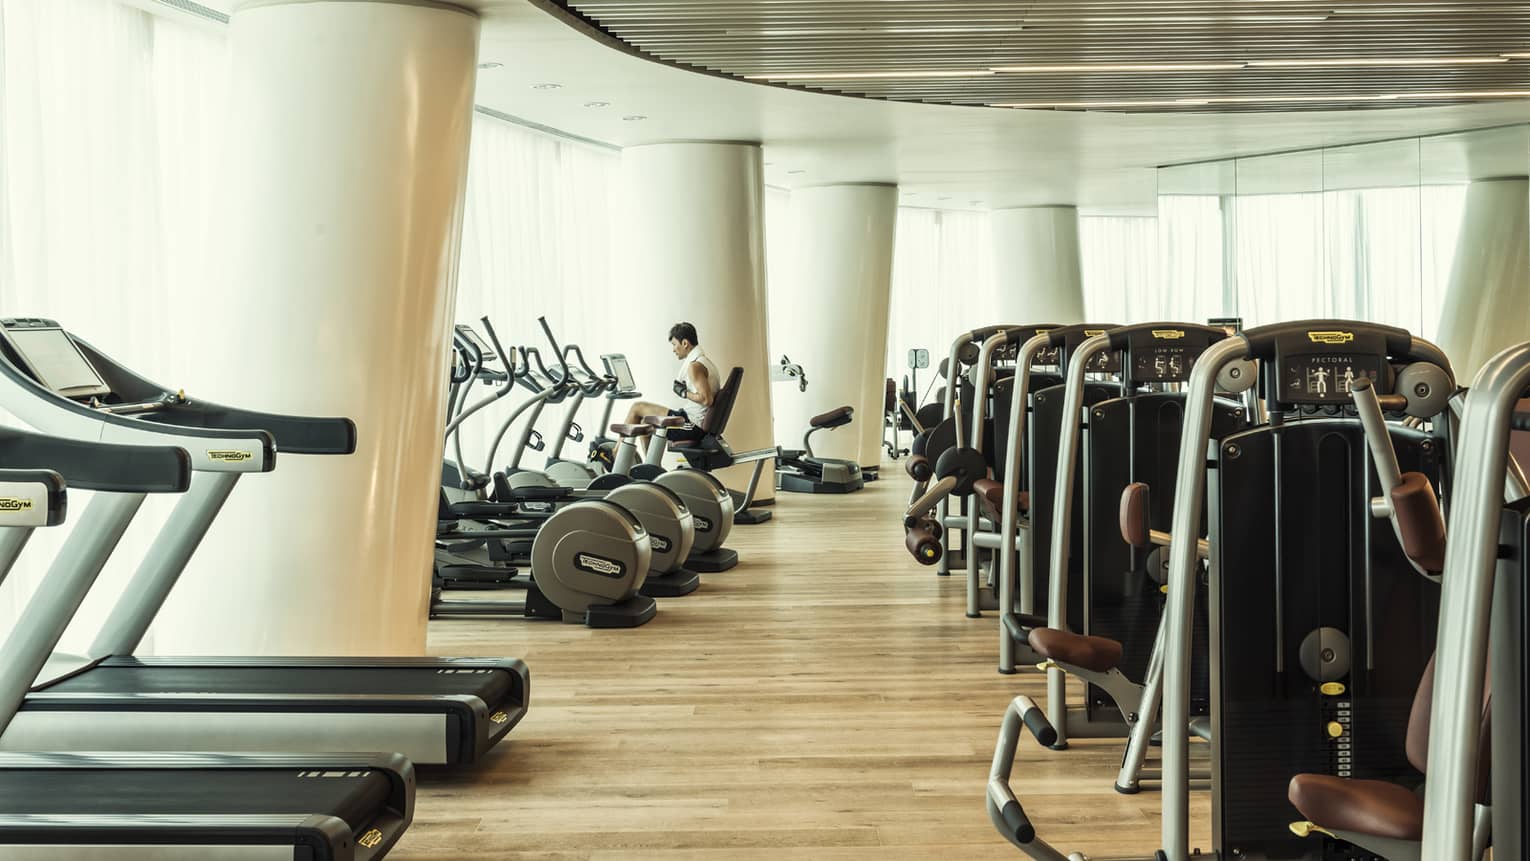 Cardio machines in bright fitness room with modern white pillars, man on bicycle machine